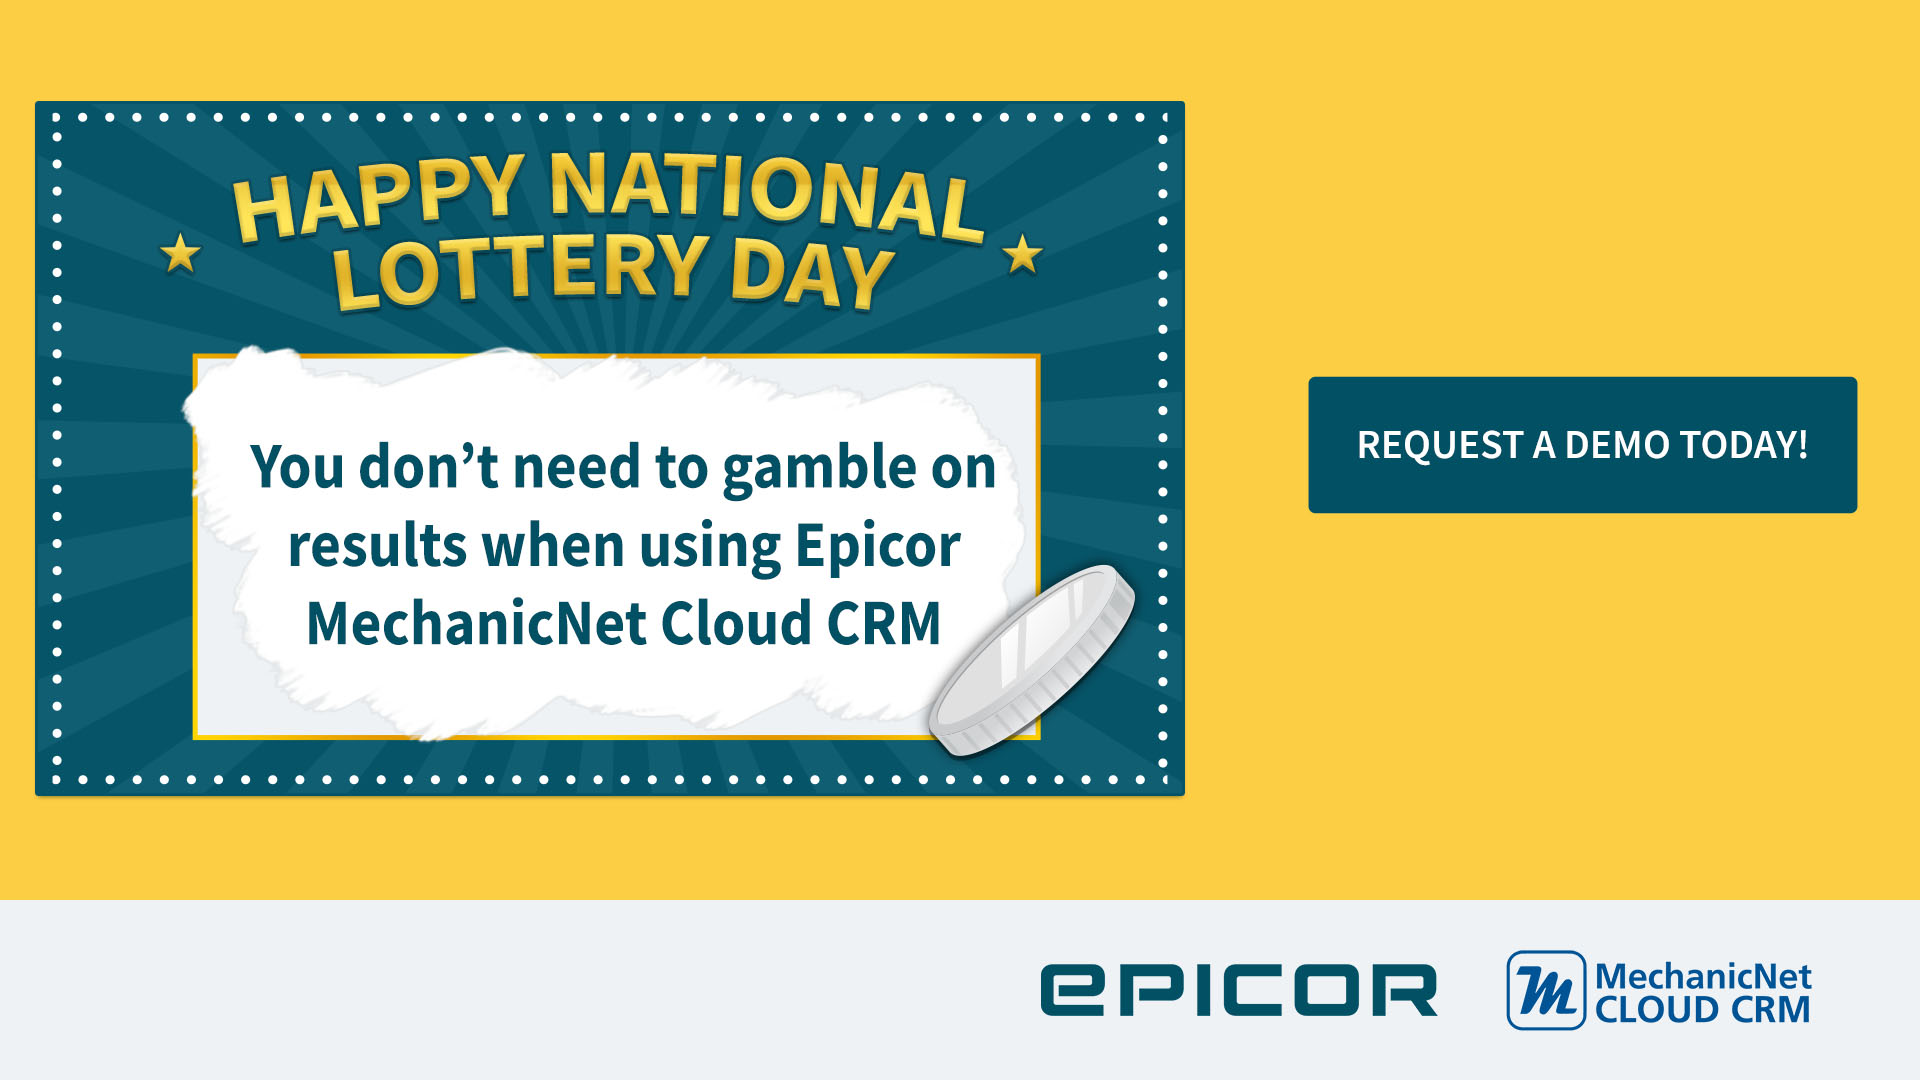 Happy National Lottery Day! You don't need to gamble on results when using MechanicNet Cloud CRM. Button: Request a demo today!